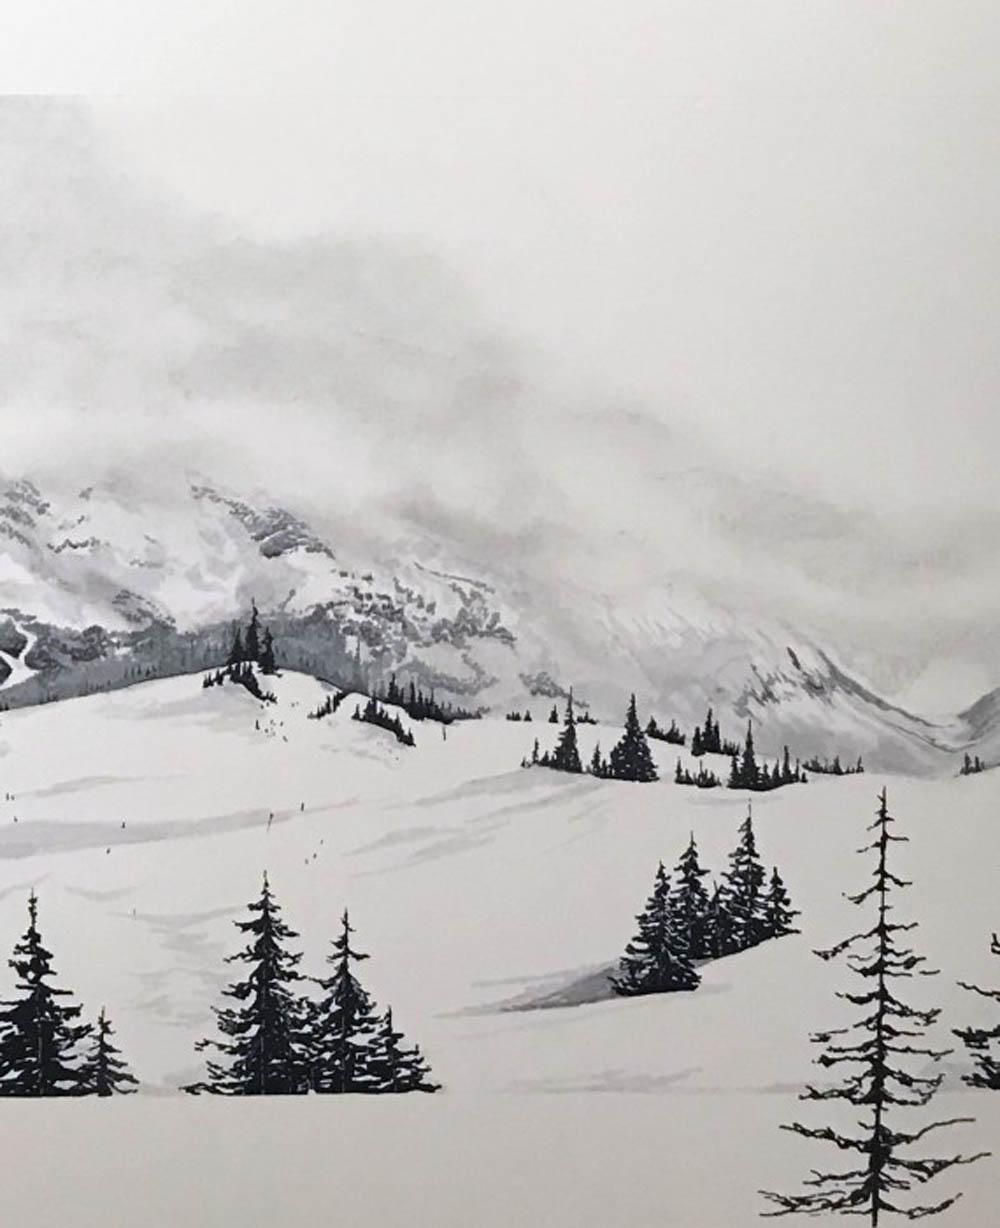 Les Arcs, France, photographic style realist art , original art for sale  - Mixed Media Art by Sam Gare